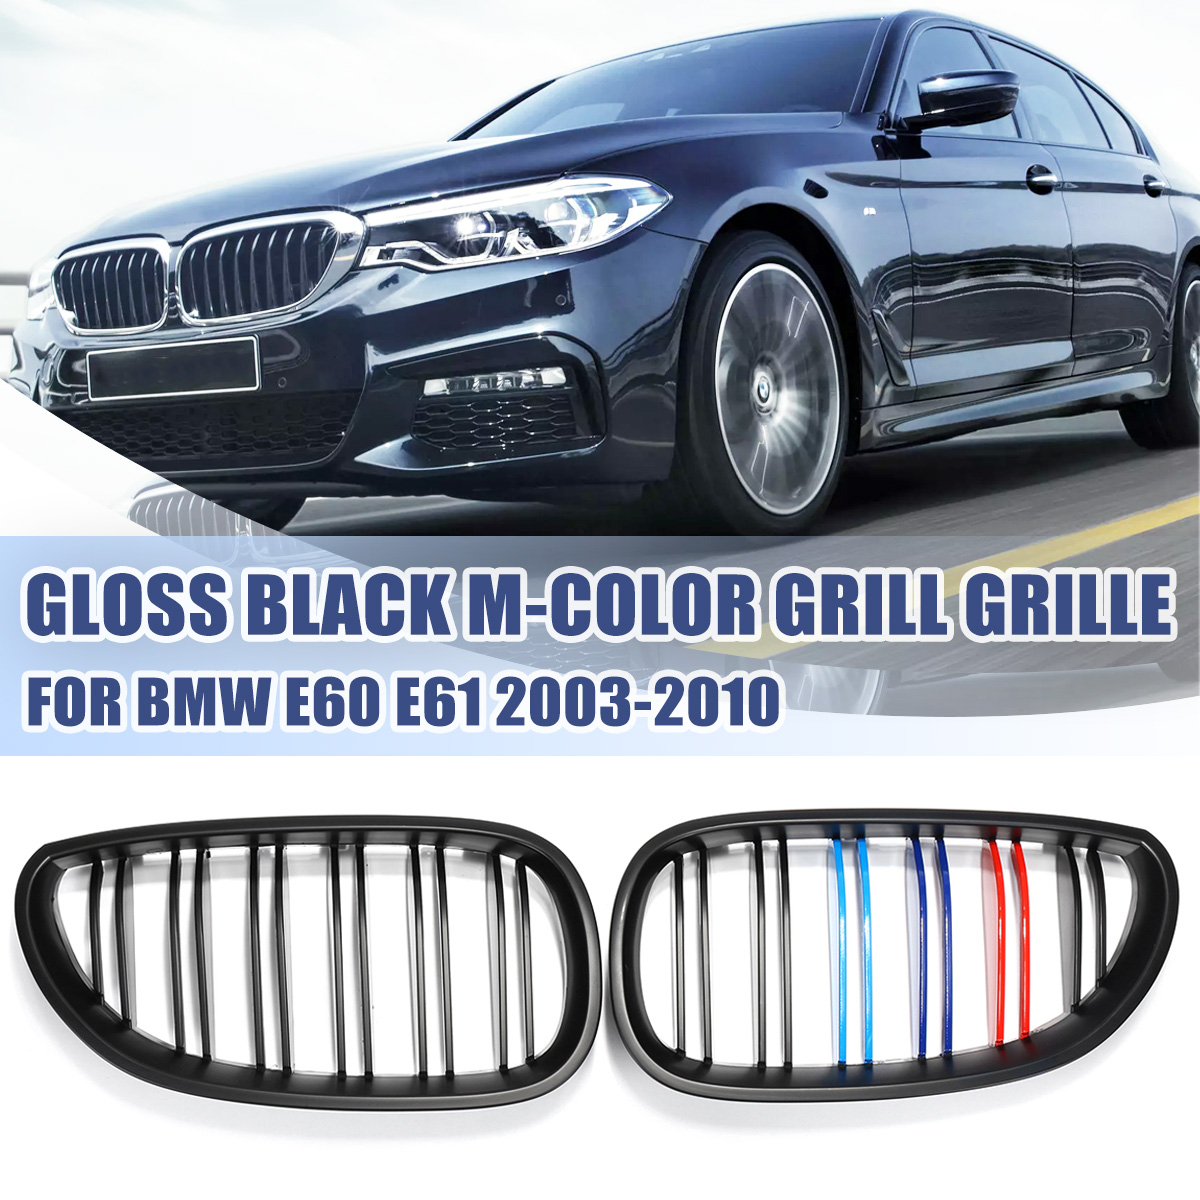 Viviance Pair New Gloss Black M-Color Front Kidney Grill Grille For BMW E60 E61 03-10